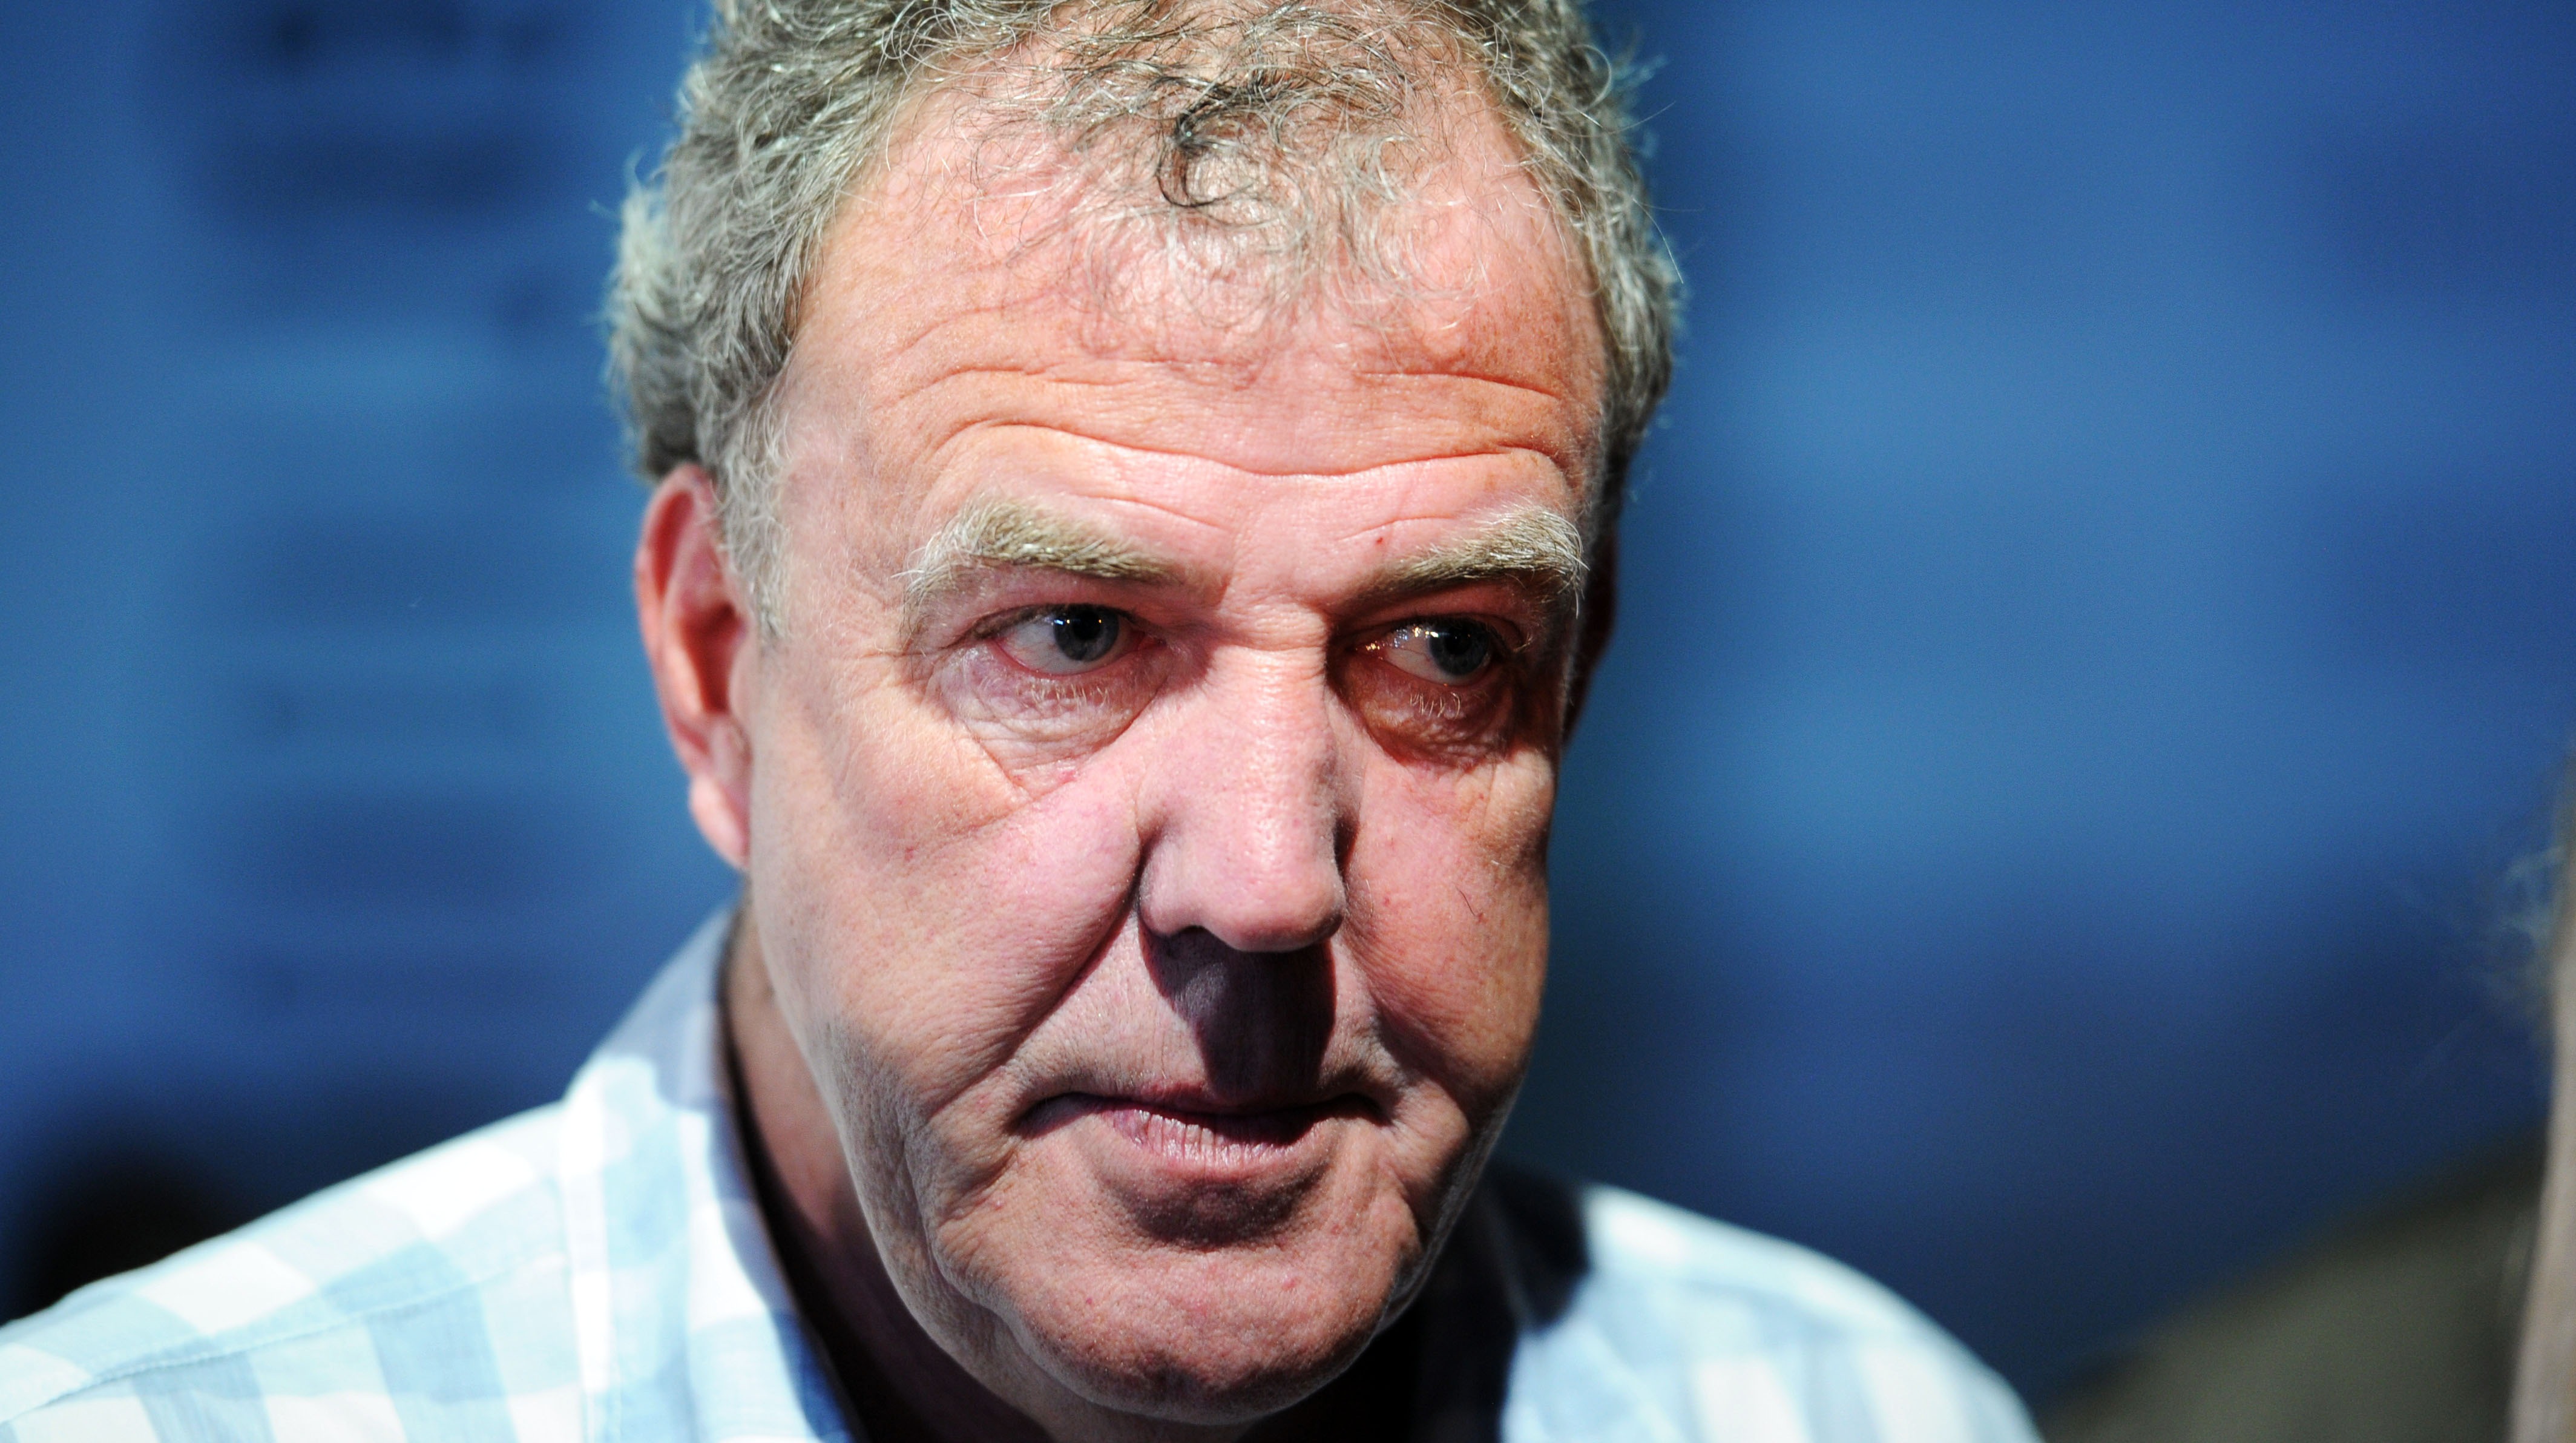 Jeremy Clarkson Admits Receiving Points On Licence After Speeding Itv